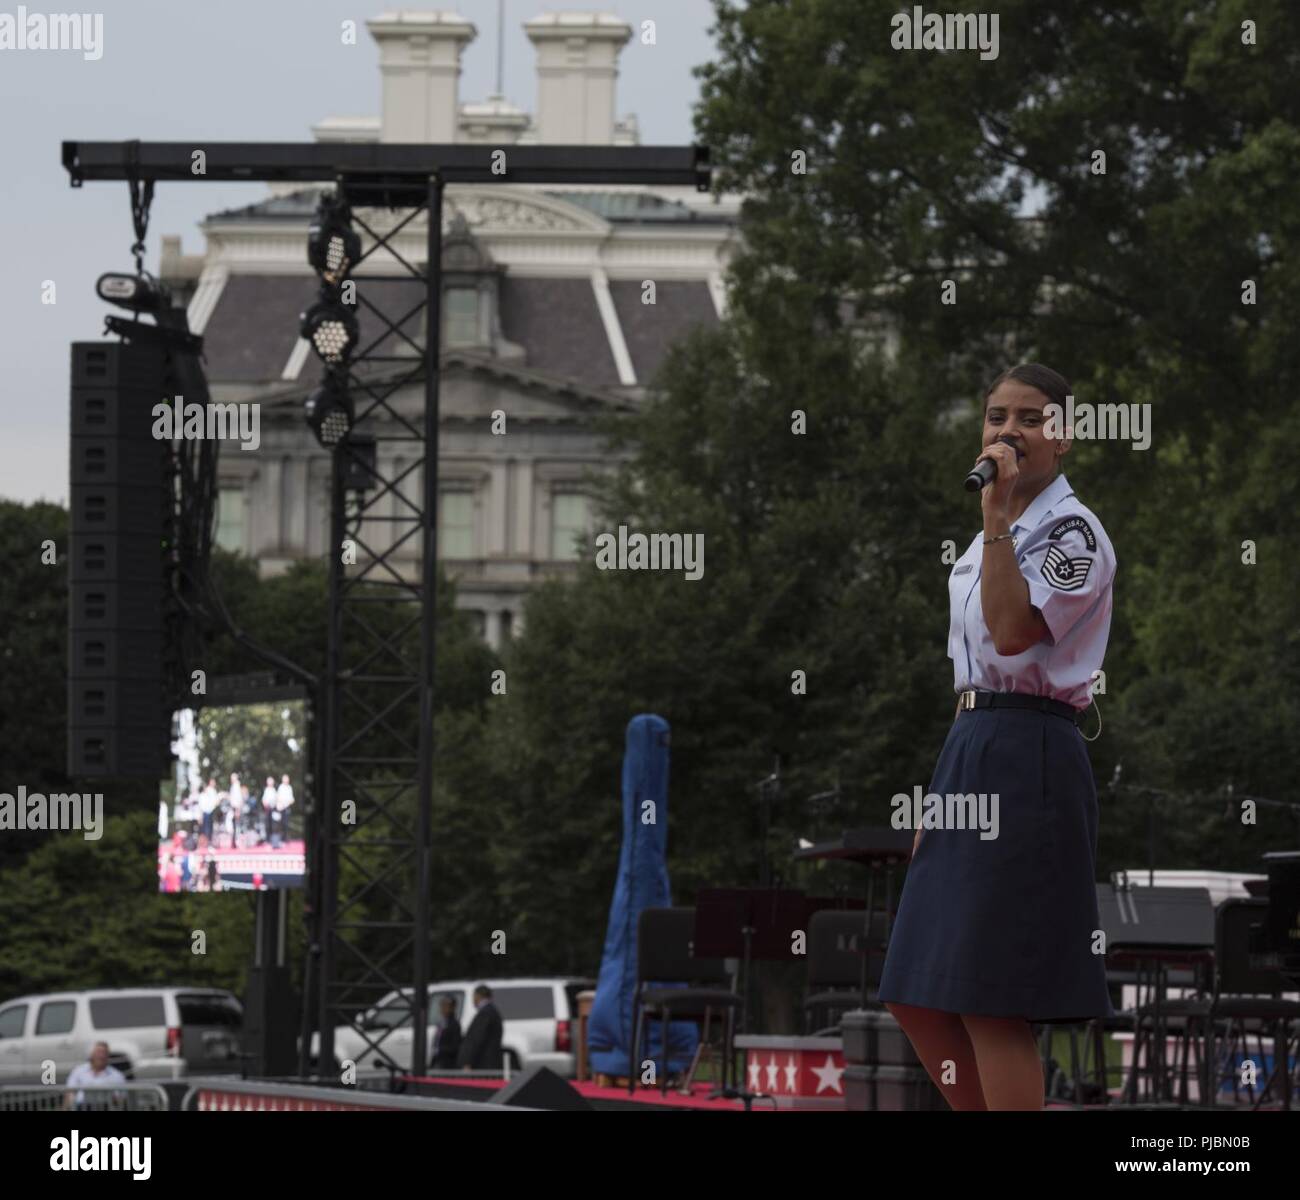 Tech. Sgt. Nalani Quintello, U.S. Air Force Band Max Impact vocalist, performs at the White House in Washington, D.C., July 4, 2018. Max Impact performed for audience members on Independence Day to honor veterans and inspire patriotism. Stock Photo